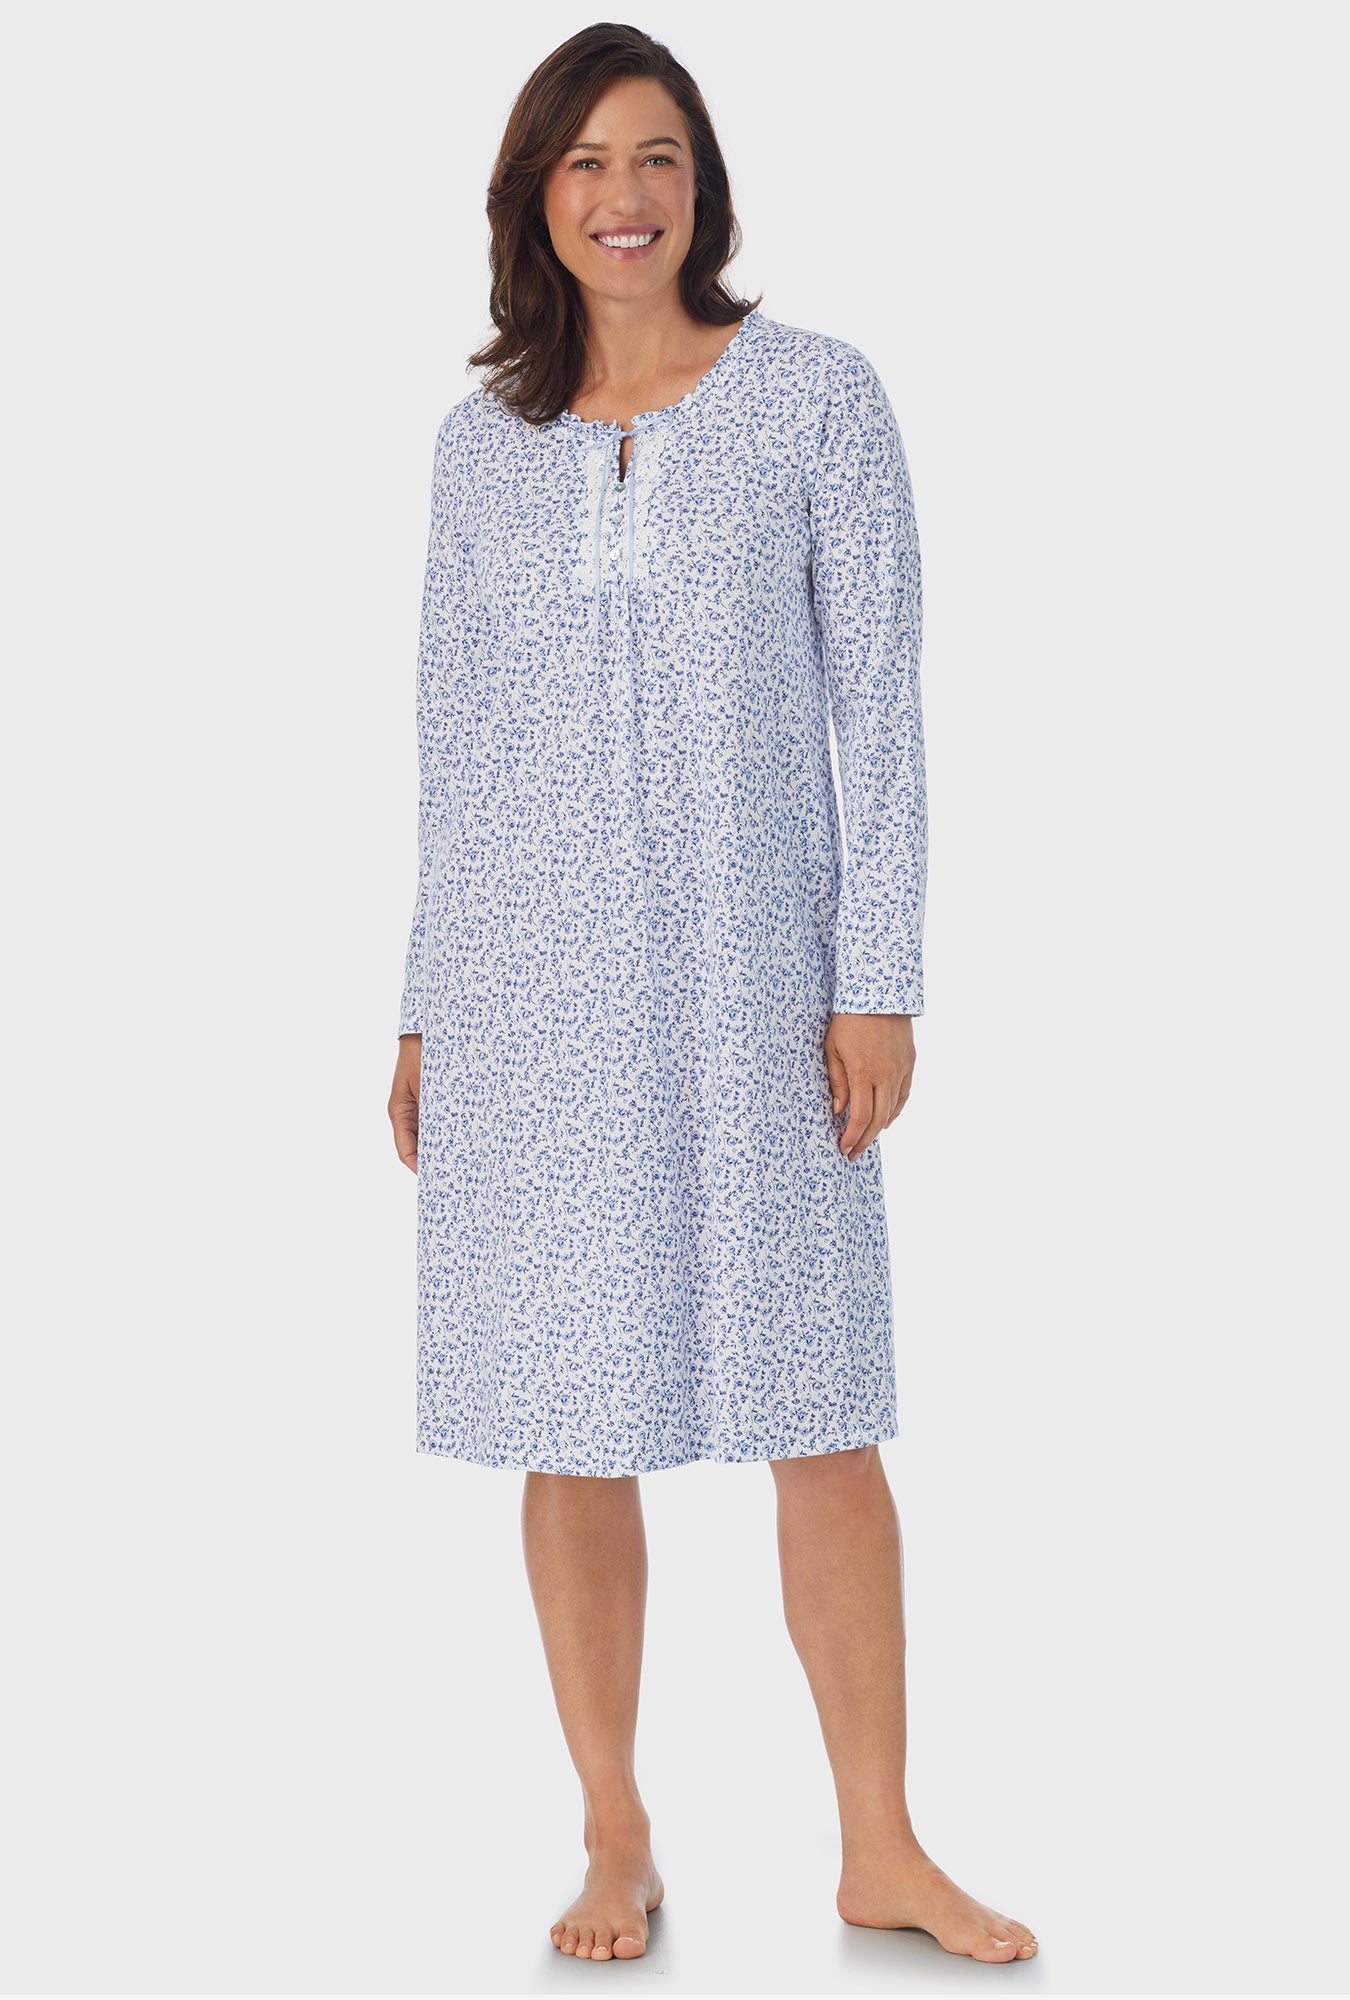 A lady wearing white Long Sleeve Midi Nightgown with Dusty Blue  print